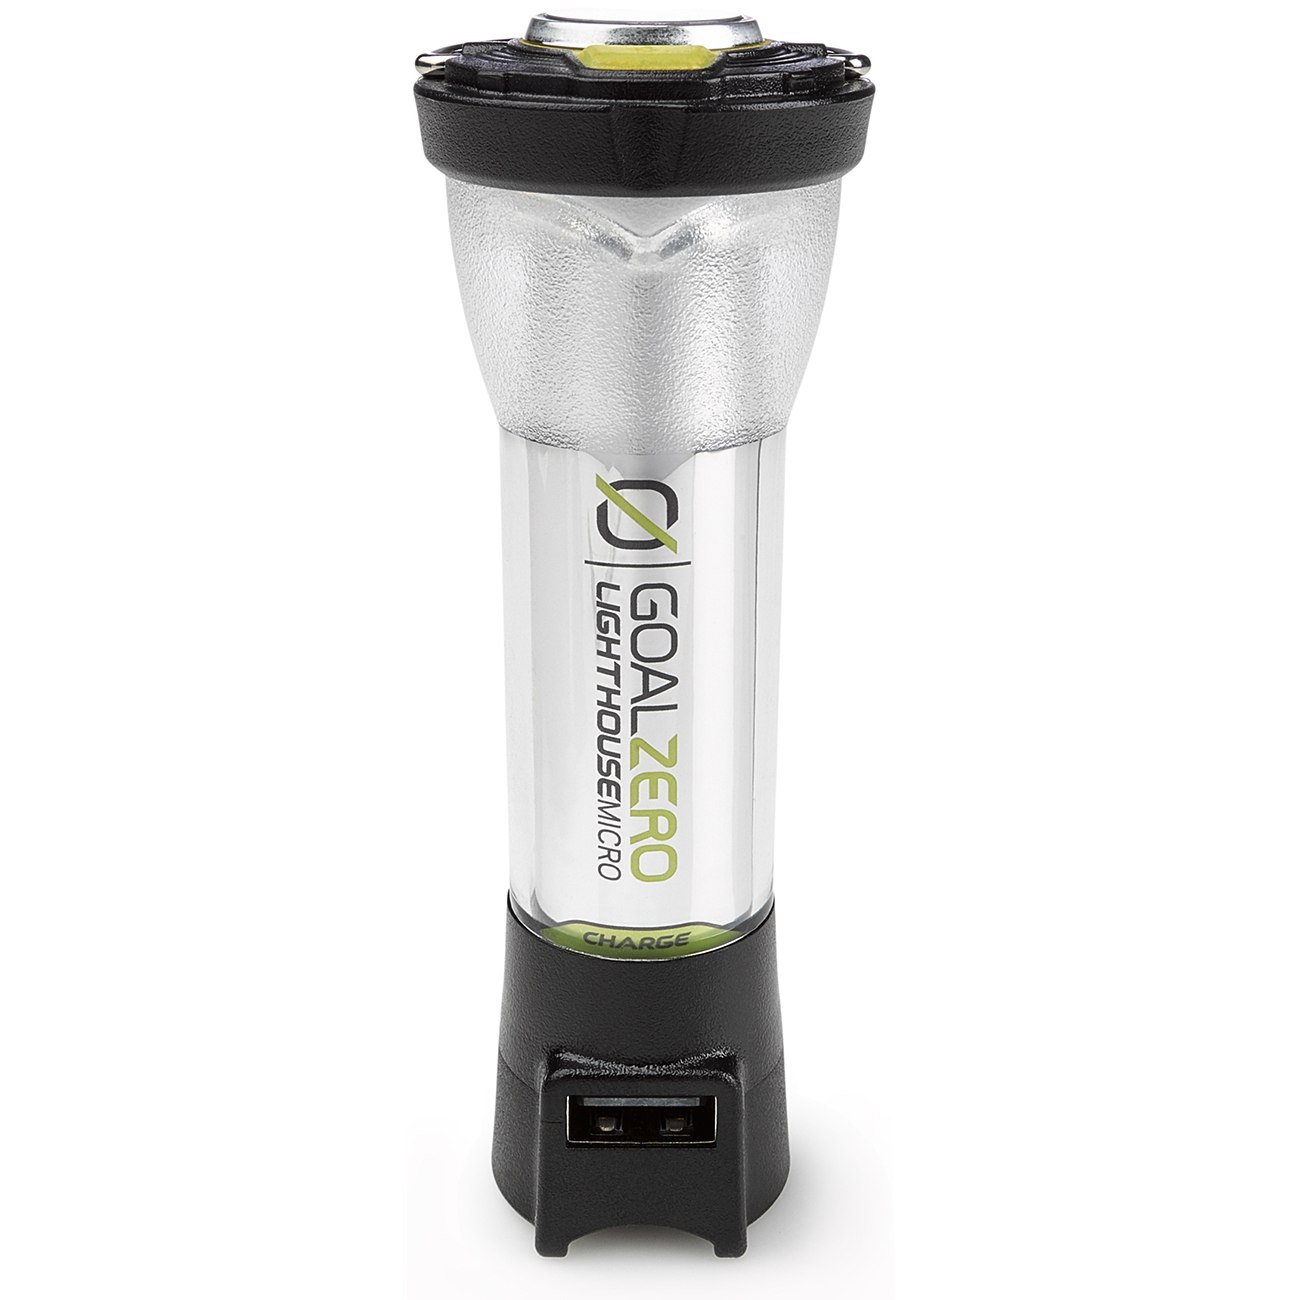 Bild von Goal Zero Lighthouse Micro Charge USB Rechargeable LED Lampe